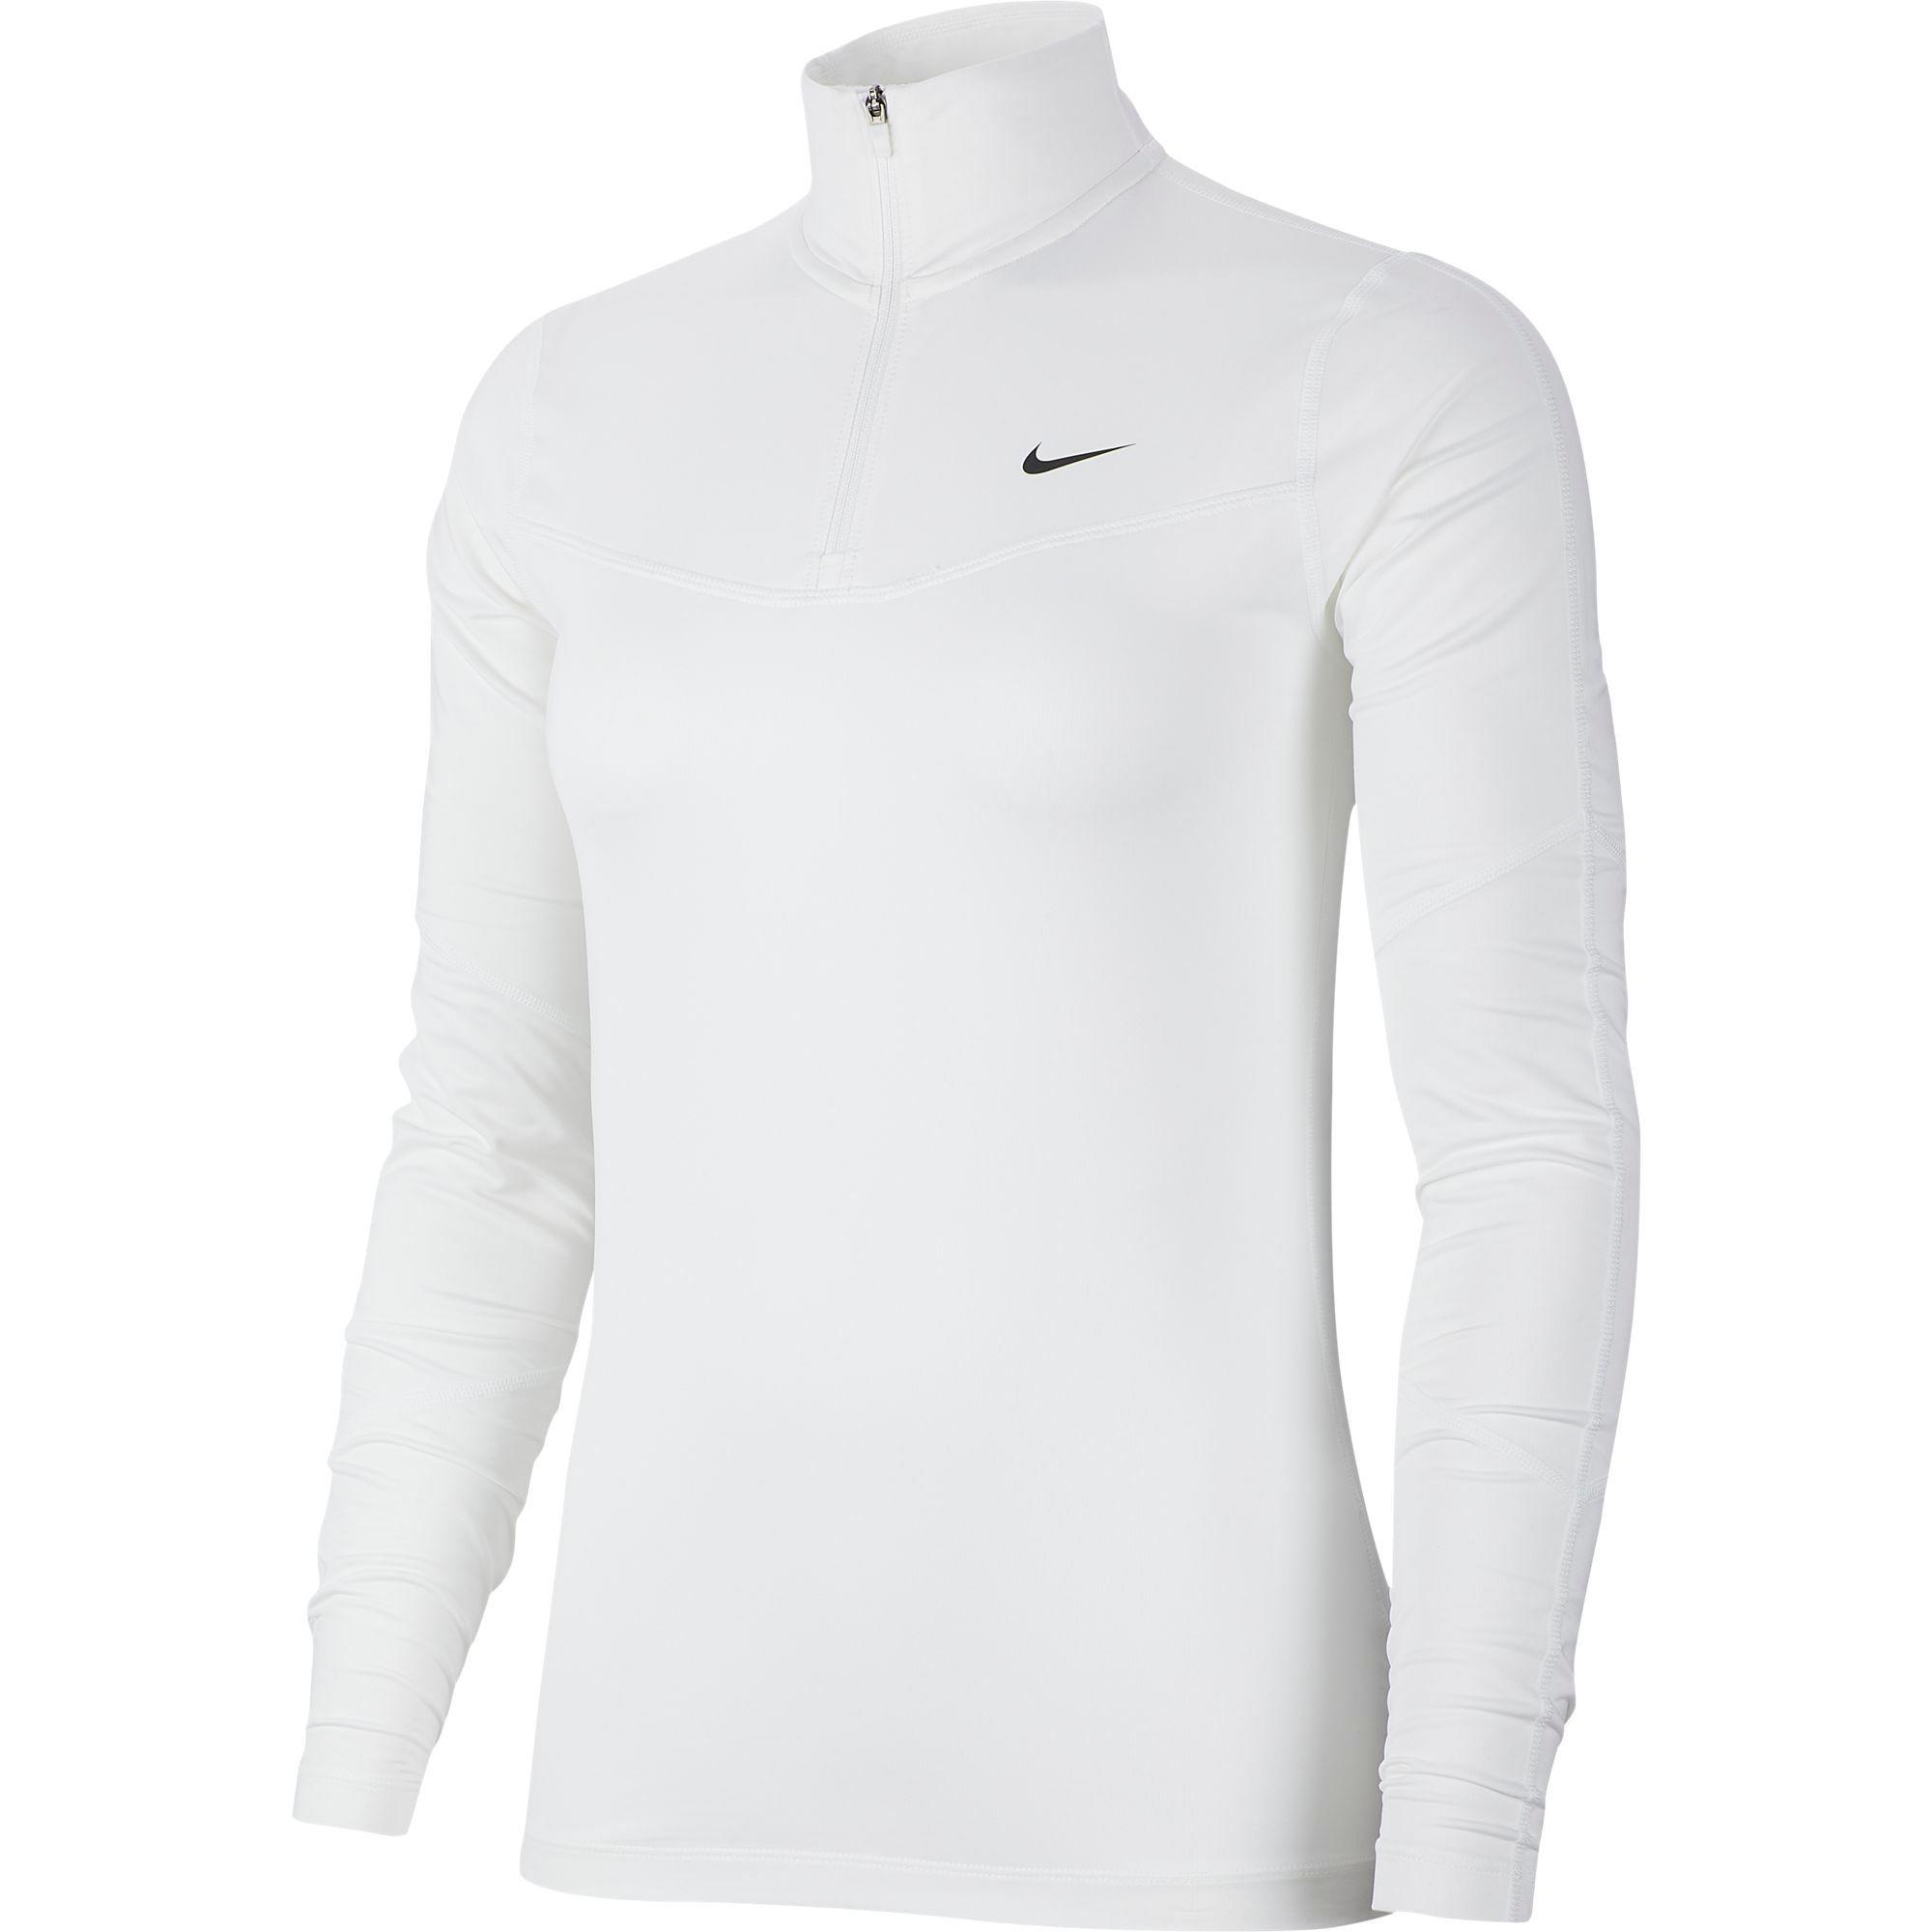 Nike Synthetic Pro Warm Long Sleeve Top in White/Black (White) - Lyst